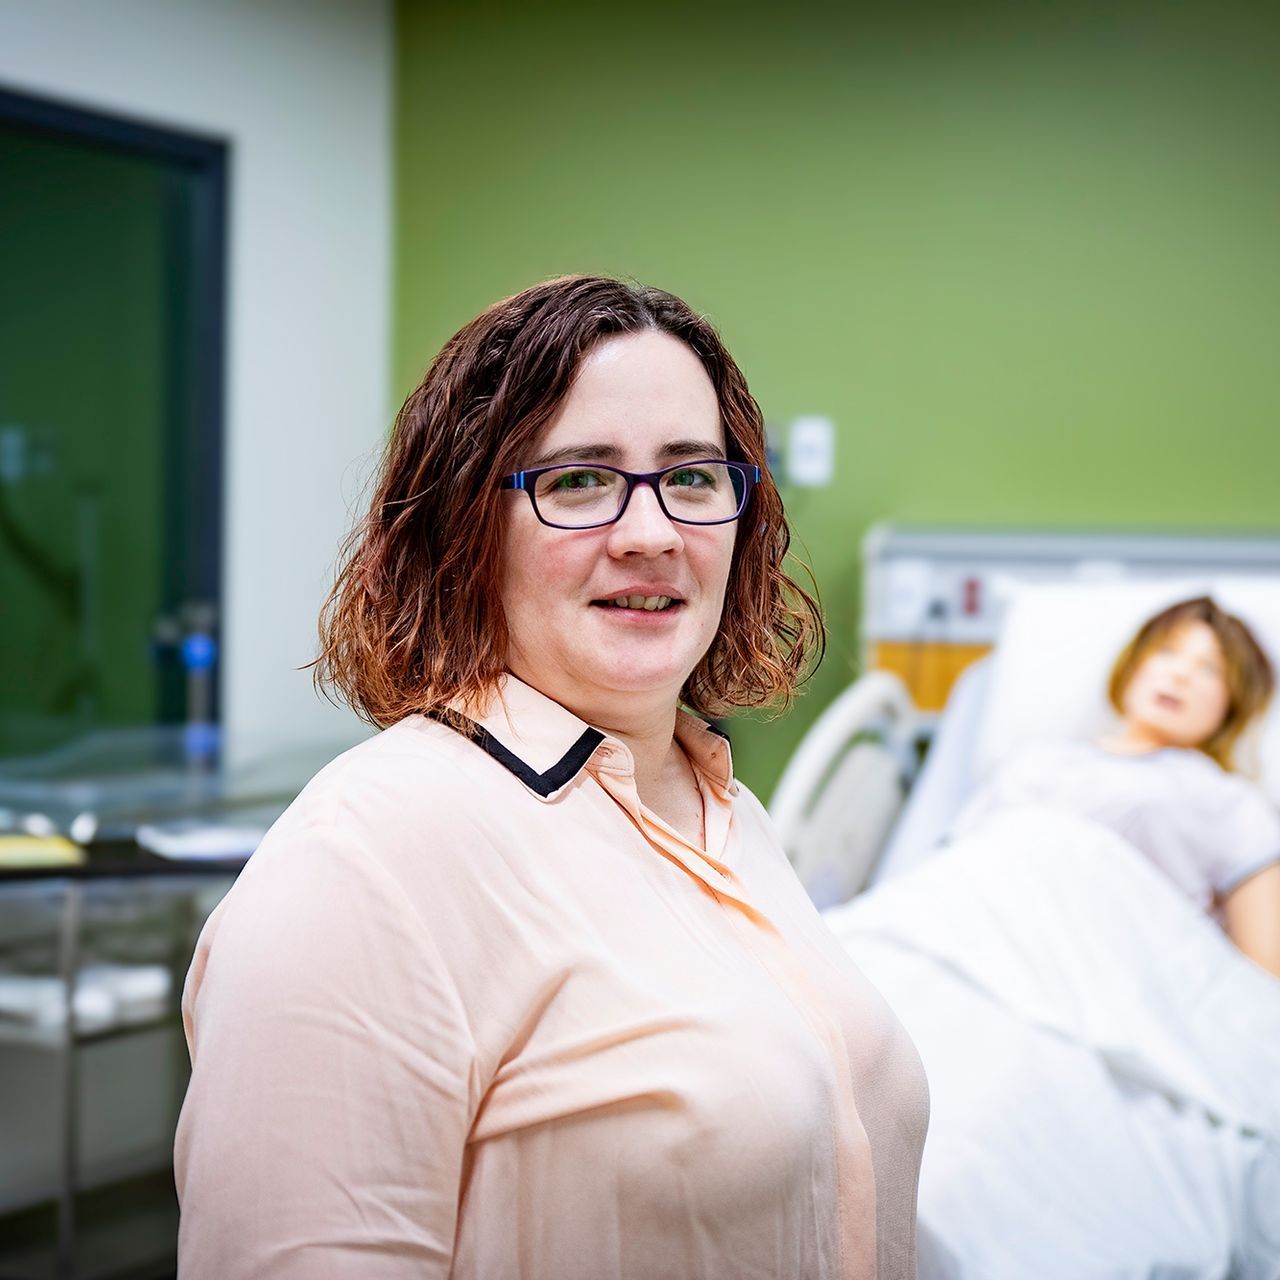 A woman wearing glasses is standing in front of a hospital bed.